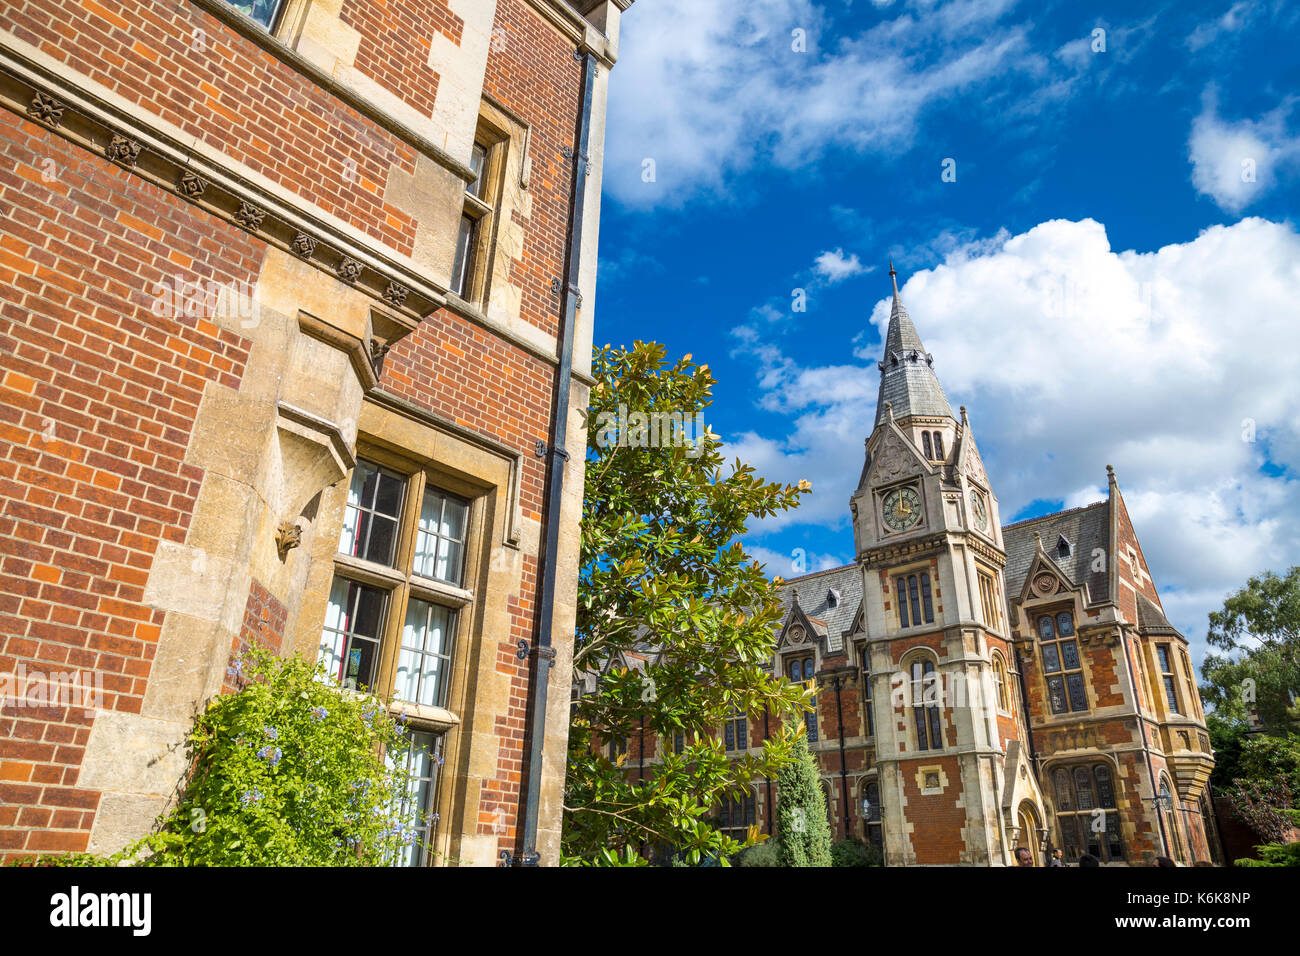 Pembroke College Old Court building and chapel (designed by Sir Christopher Wren) in Cambridge, UK Stock Photo